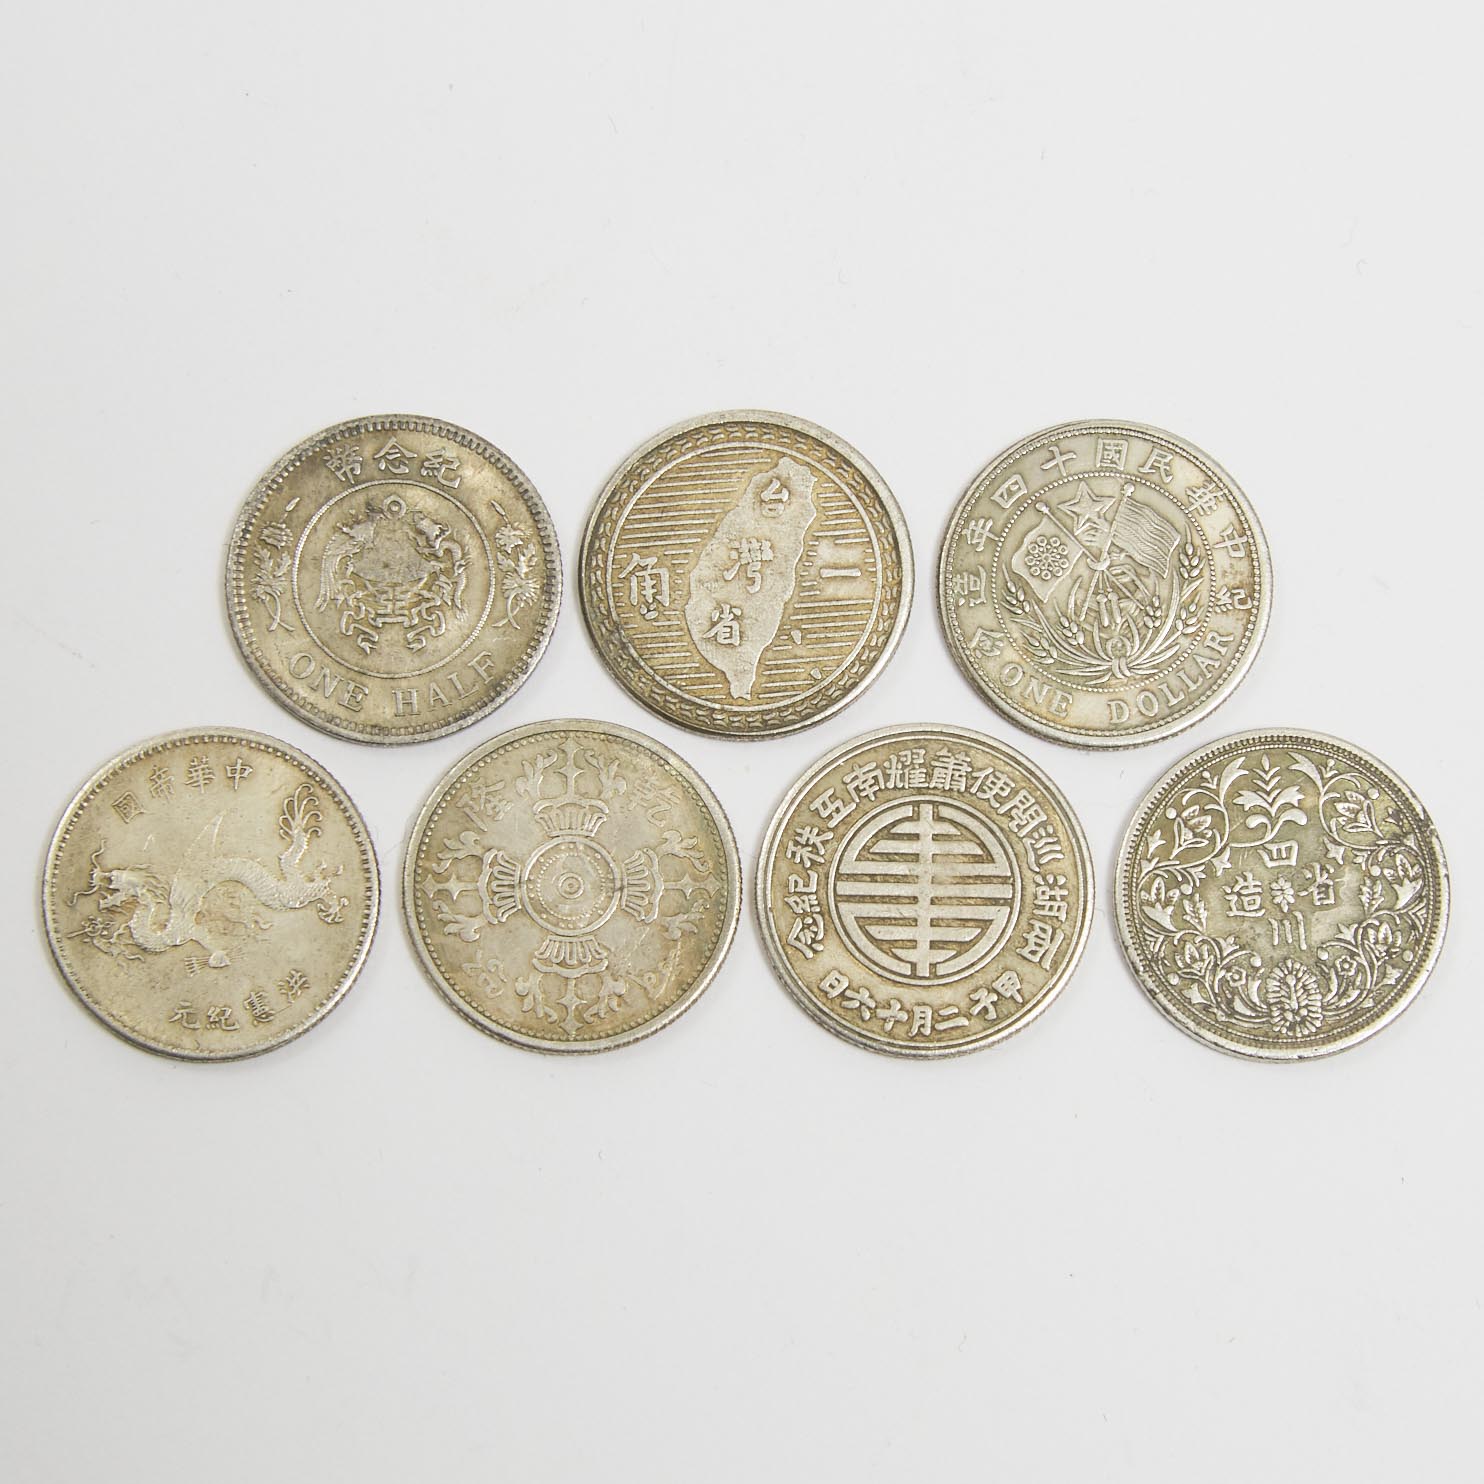 Seven Chinese Silver Coins, Late Qing/Republican Period Marks